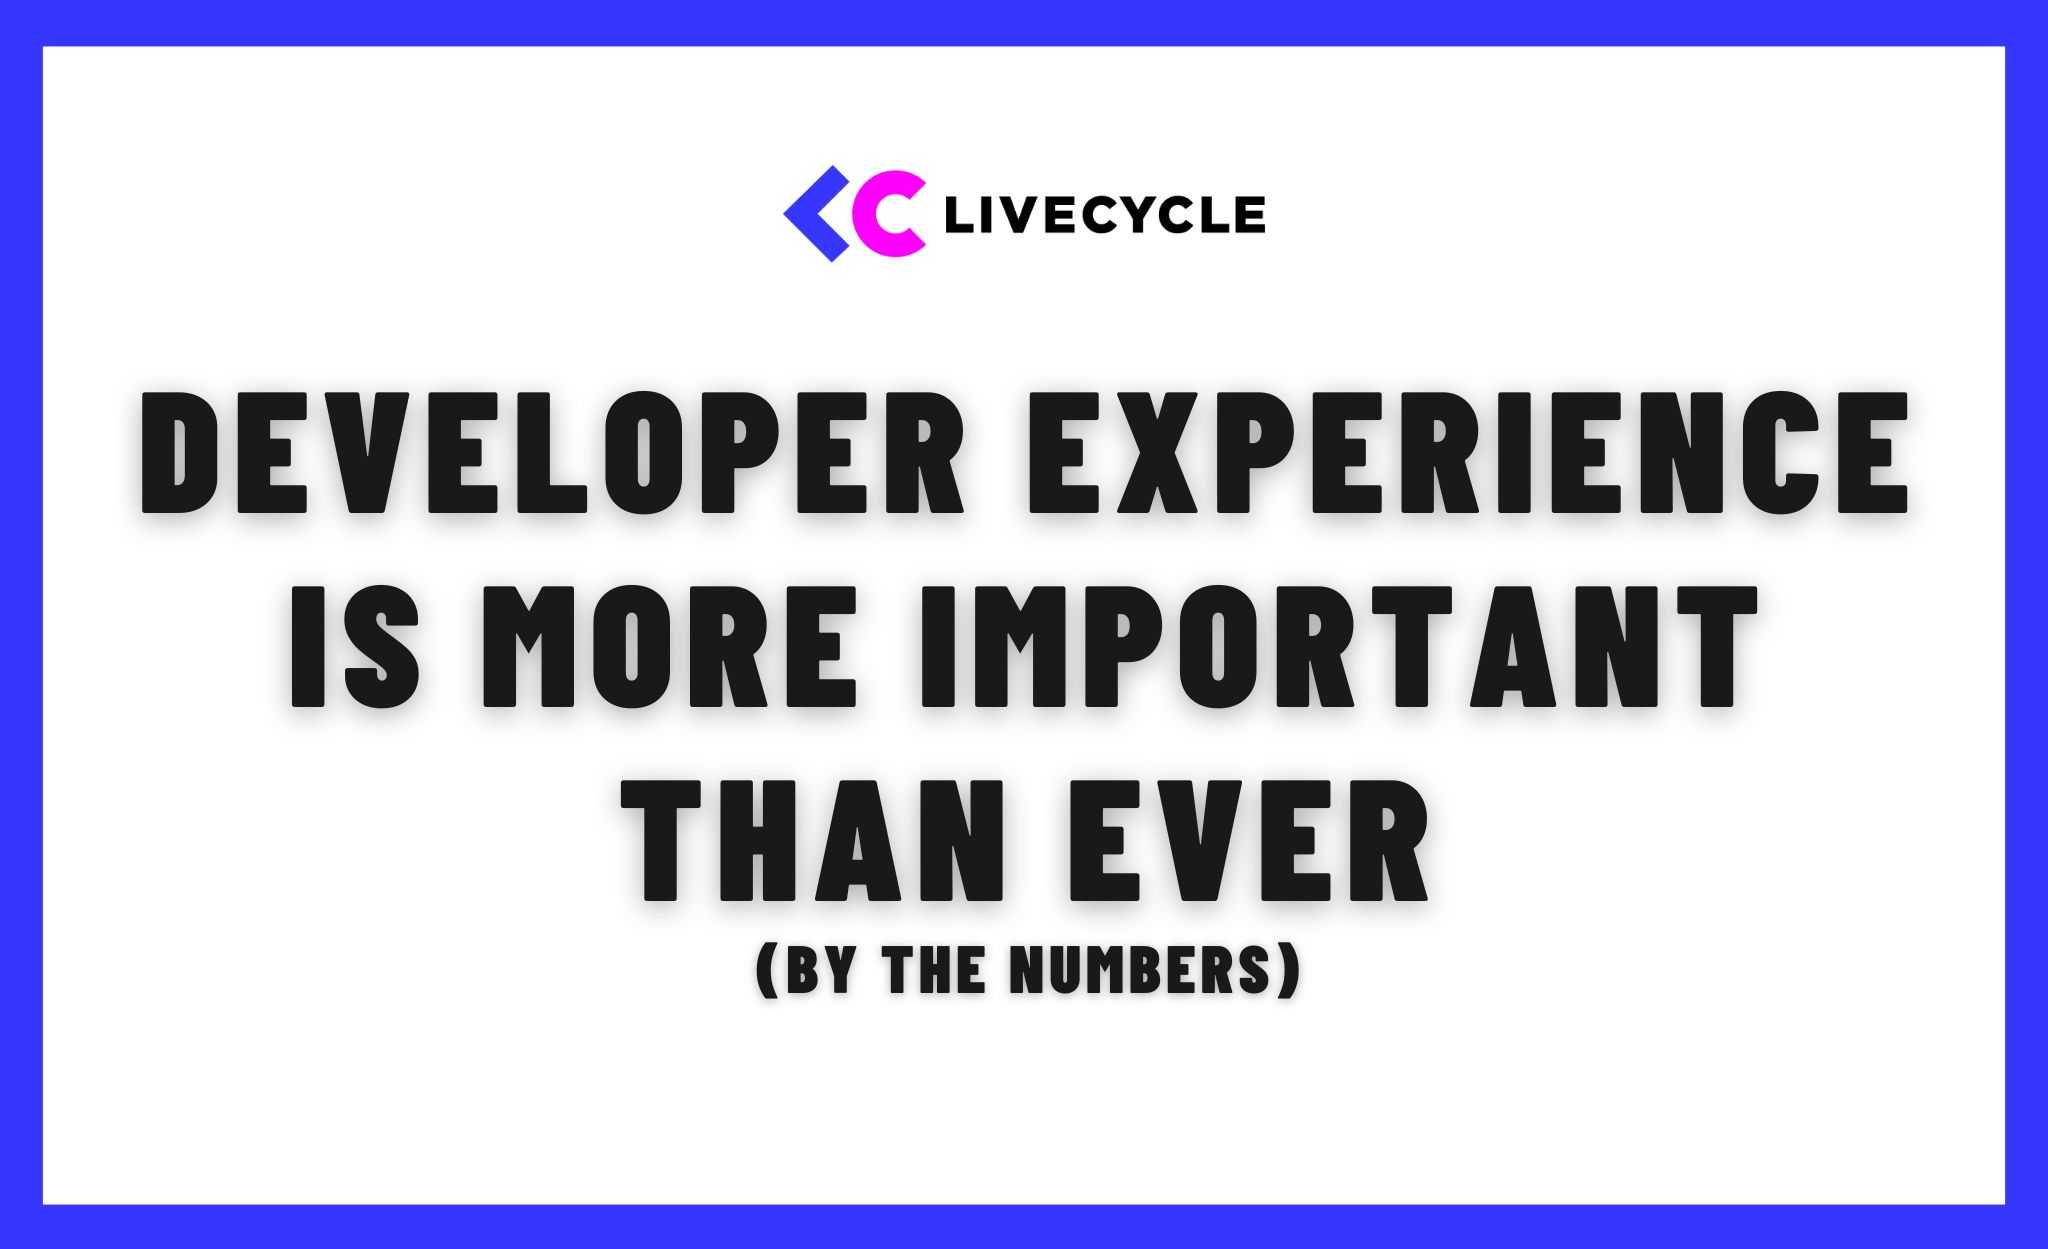 Developer experience is more important than ever. Here are the numbers.